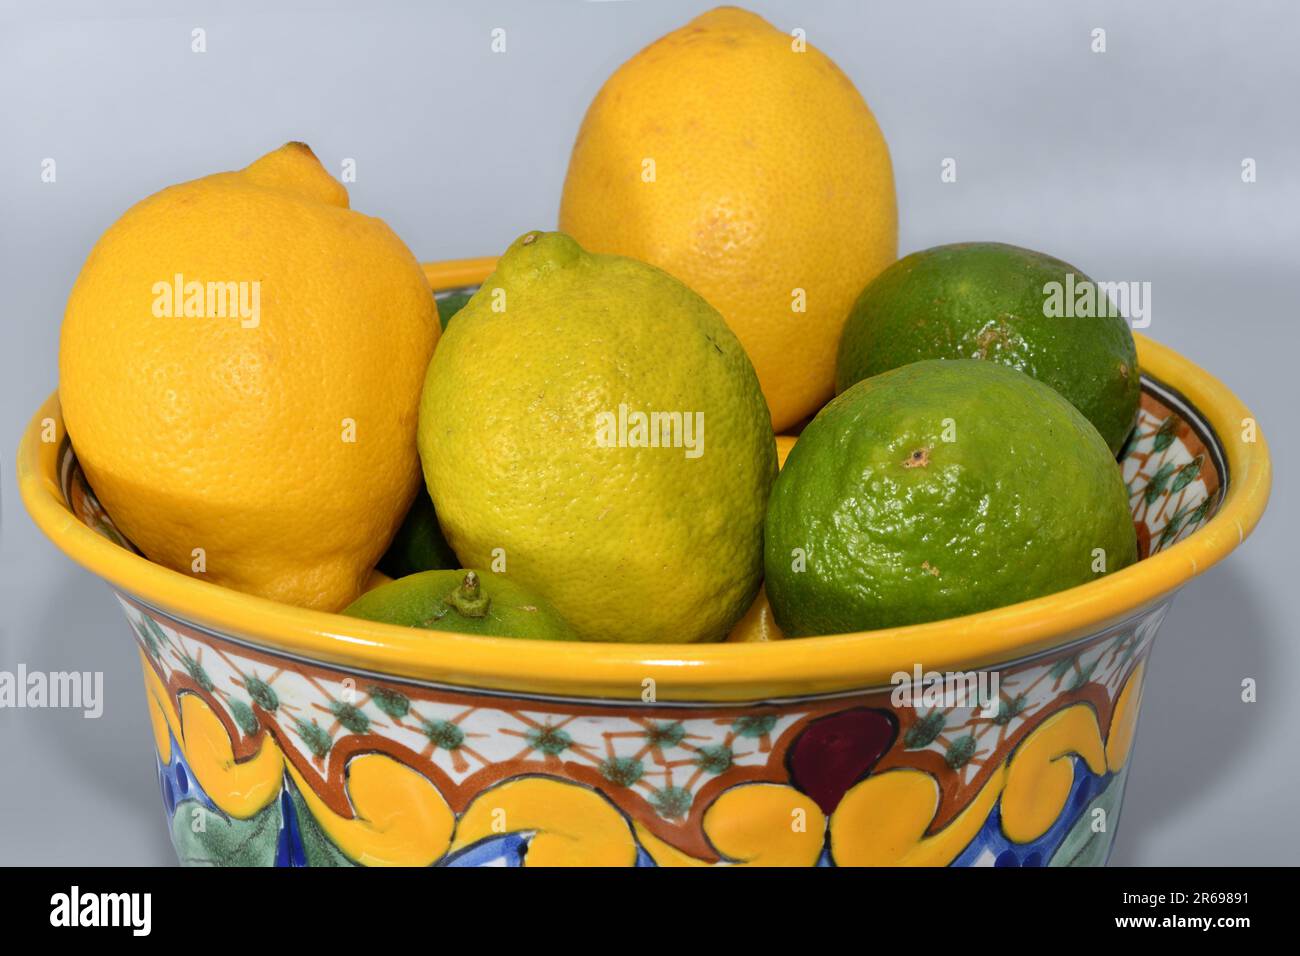 Lemons and limes in a decorative ceramic bowl. Stock Photo